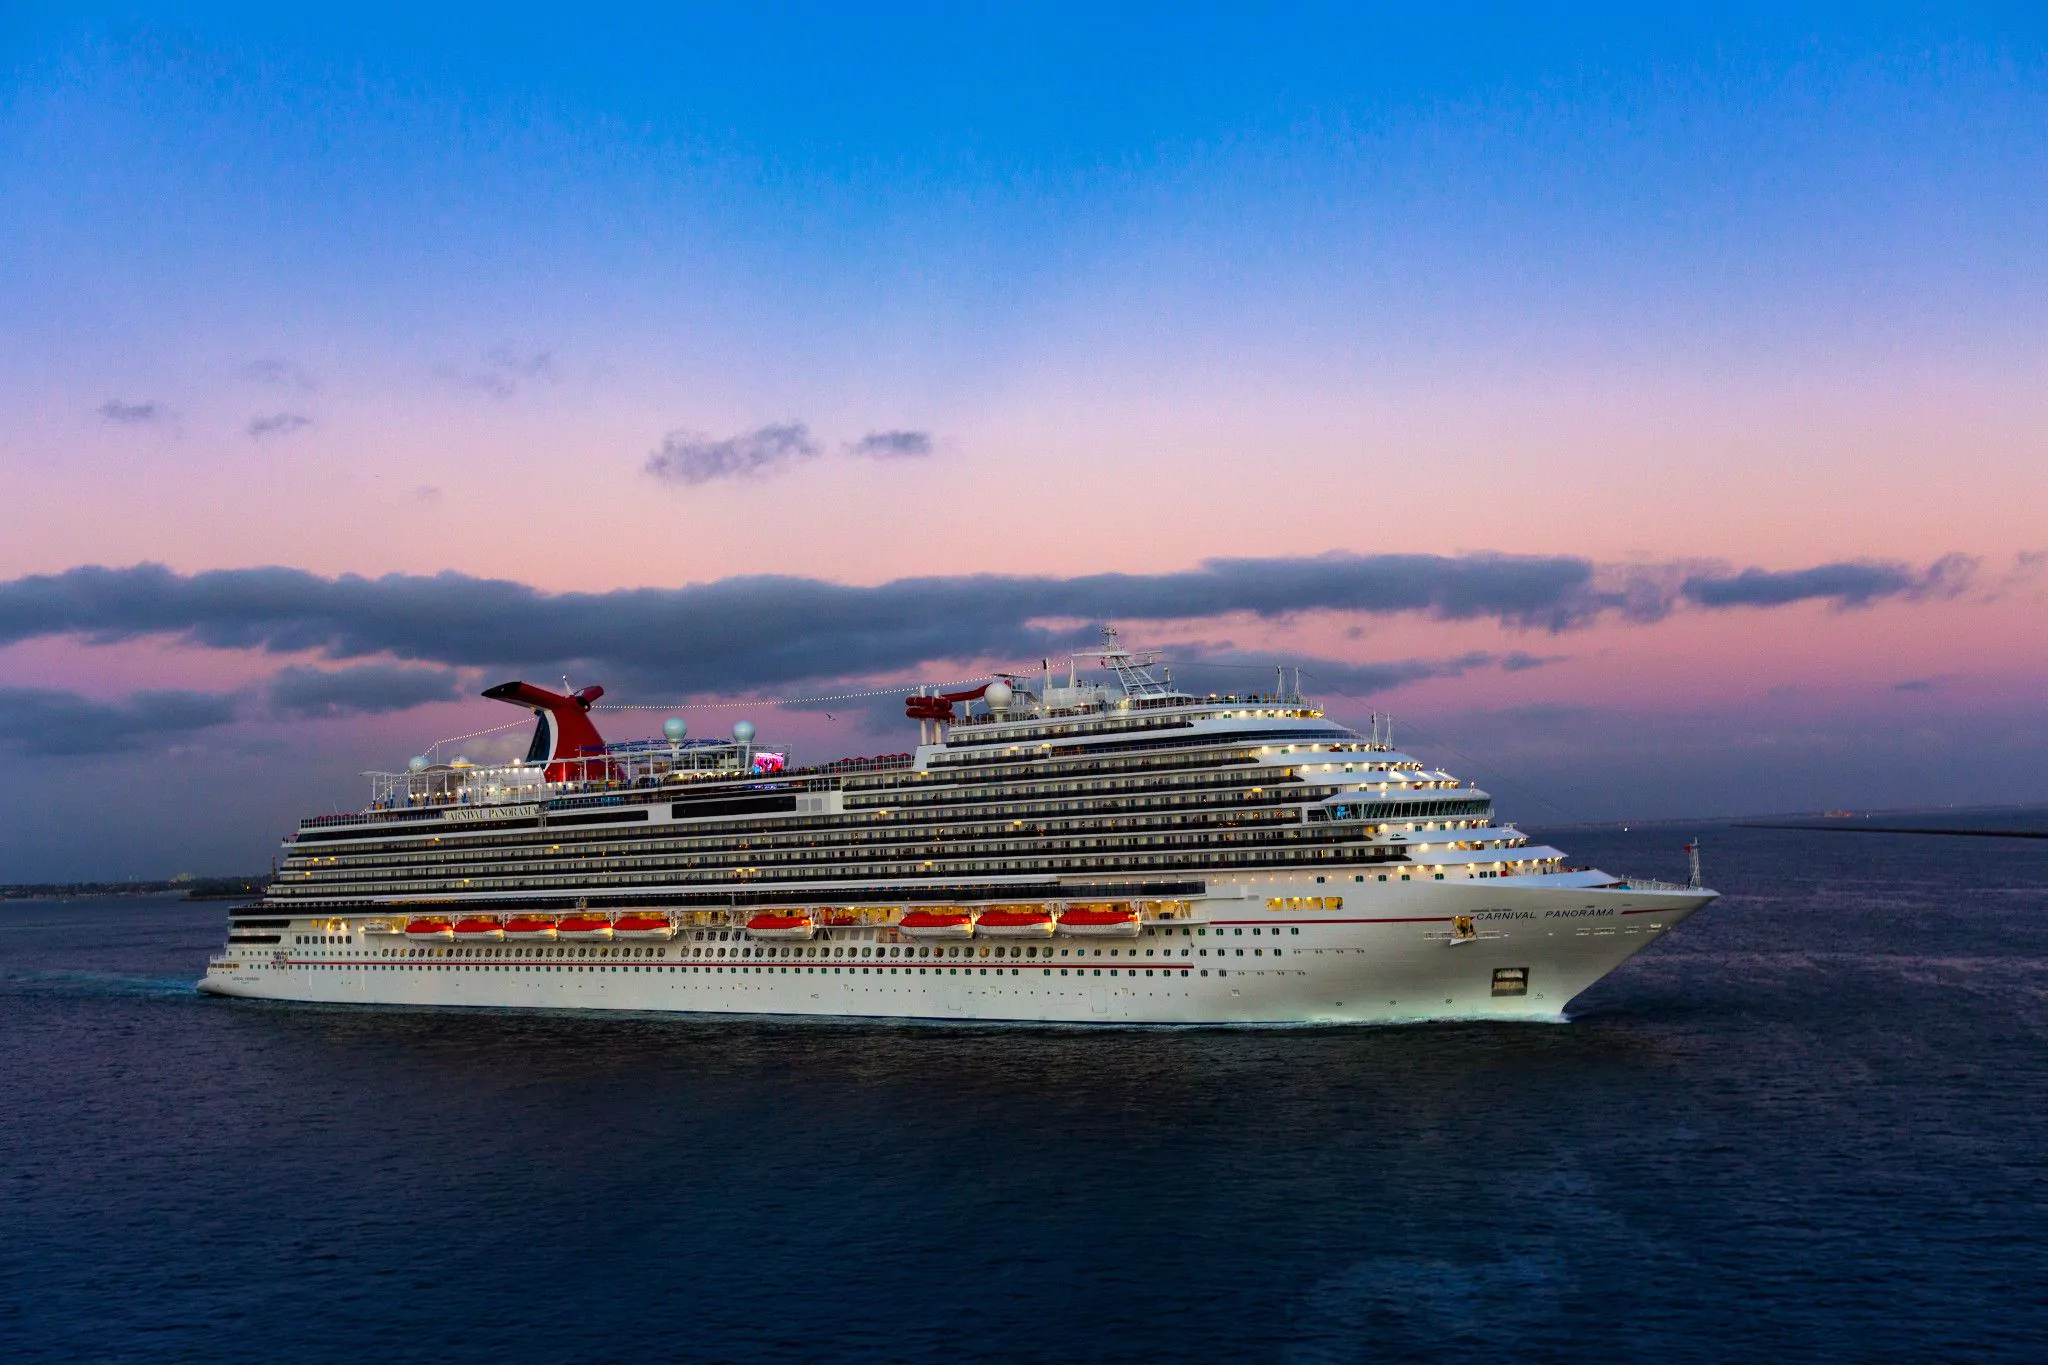 Carnival Cruise Line Expands Cruise Itineraries from Long Beach and Adds More Cruise Options from West Coast